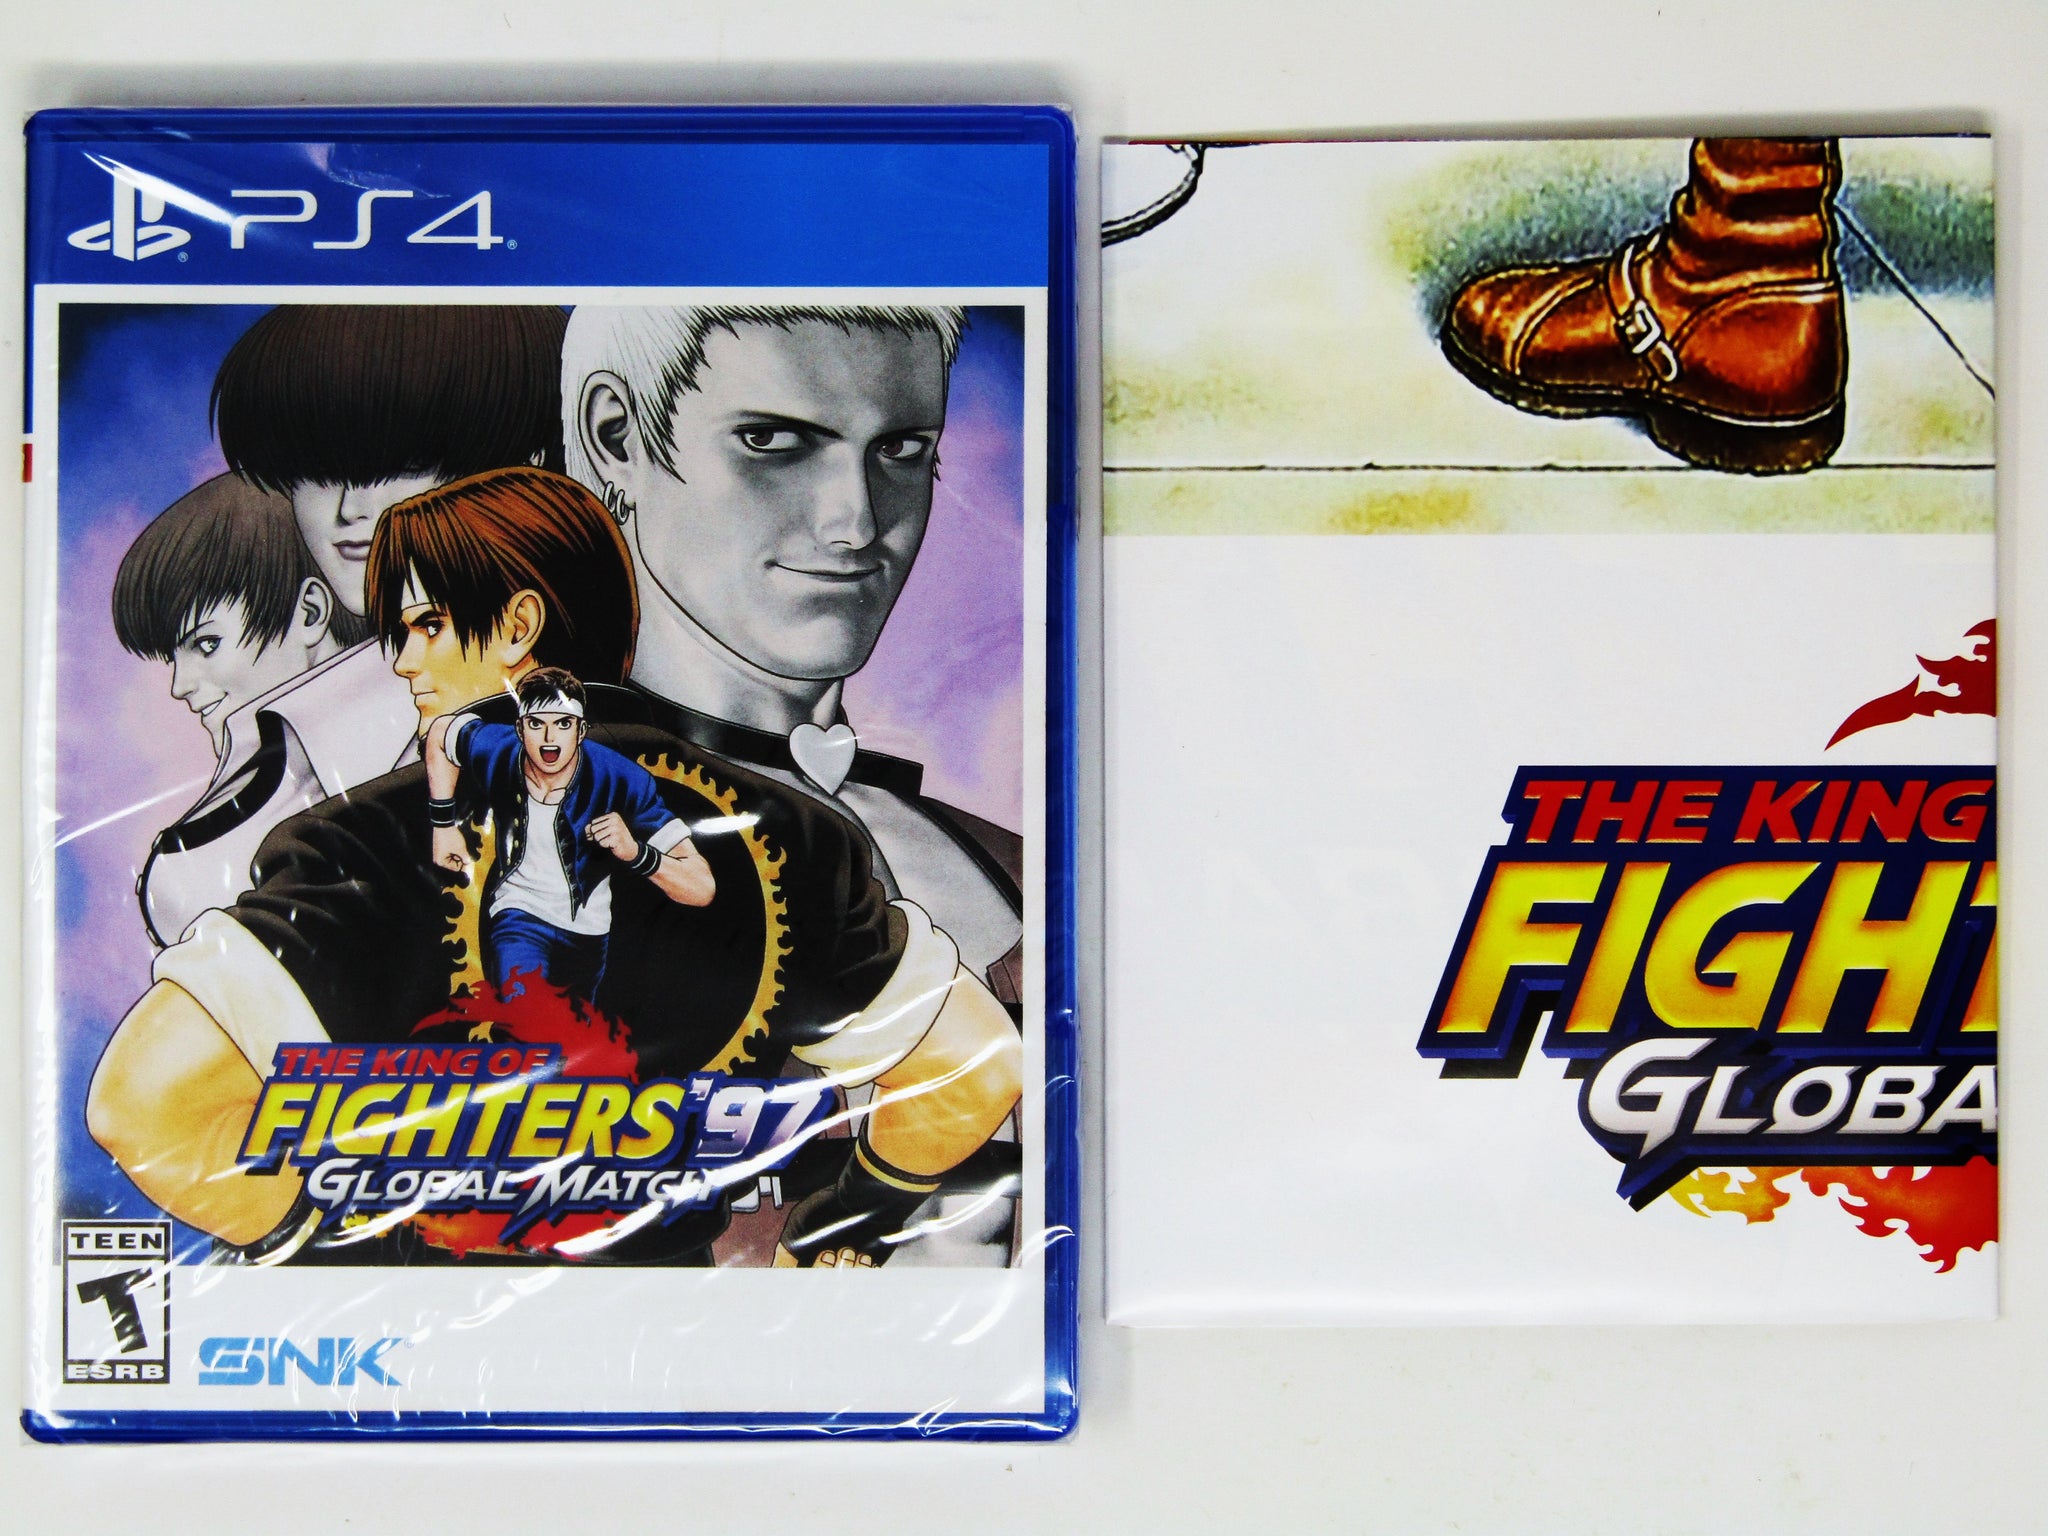 The King of Fighters 97 Global Match - PlayStation 4 (Limited Run